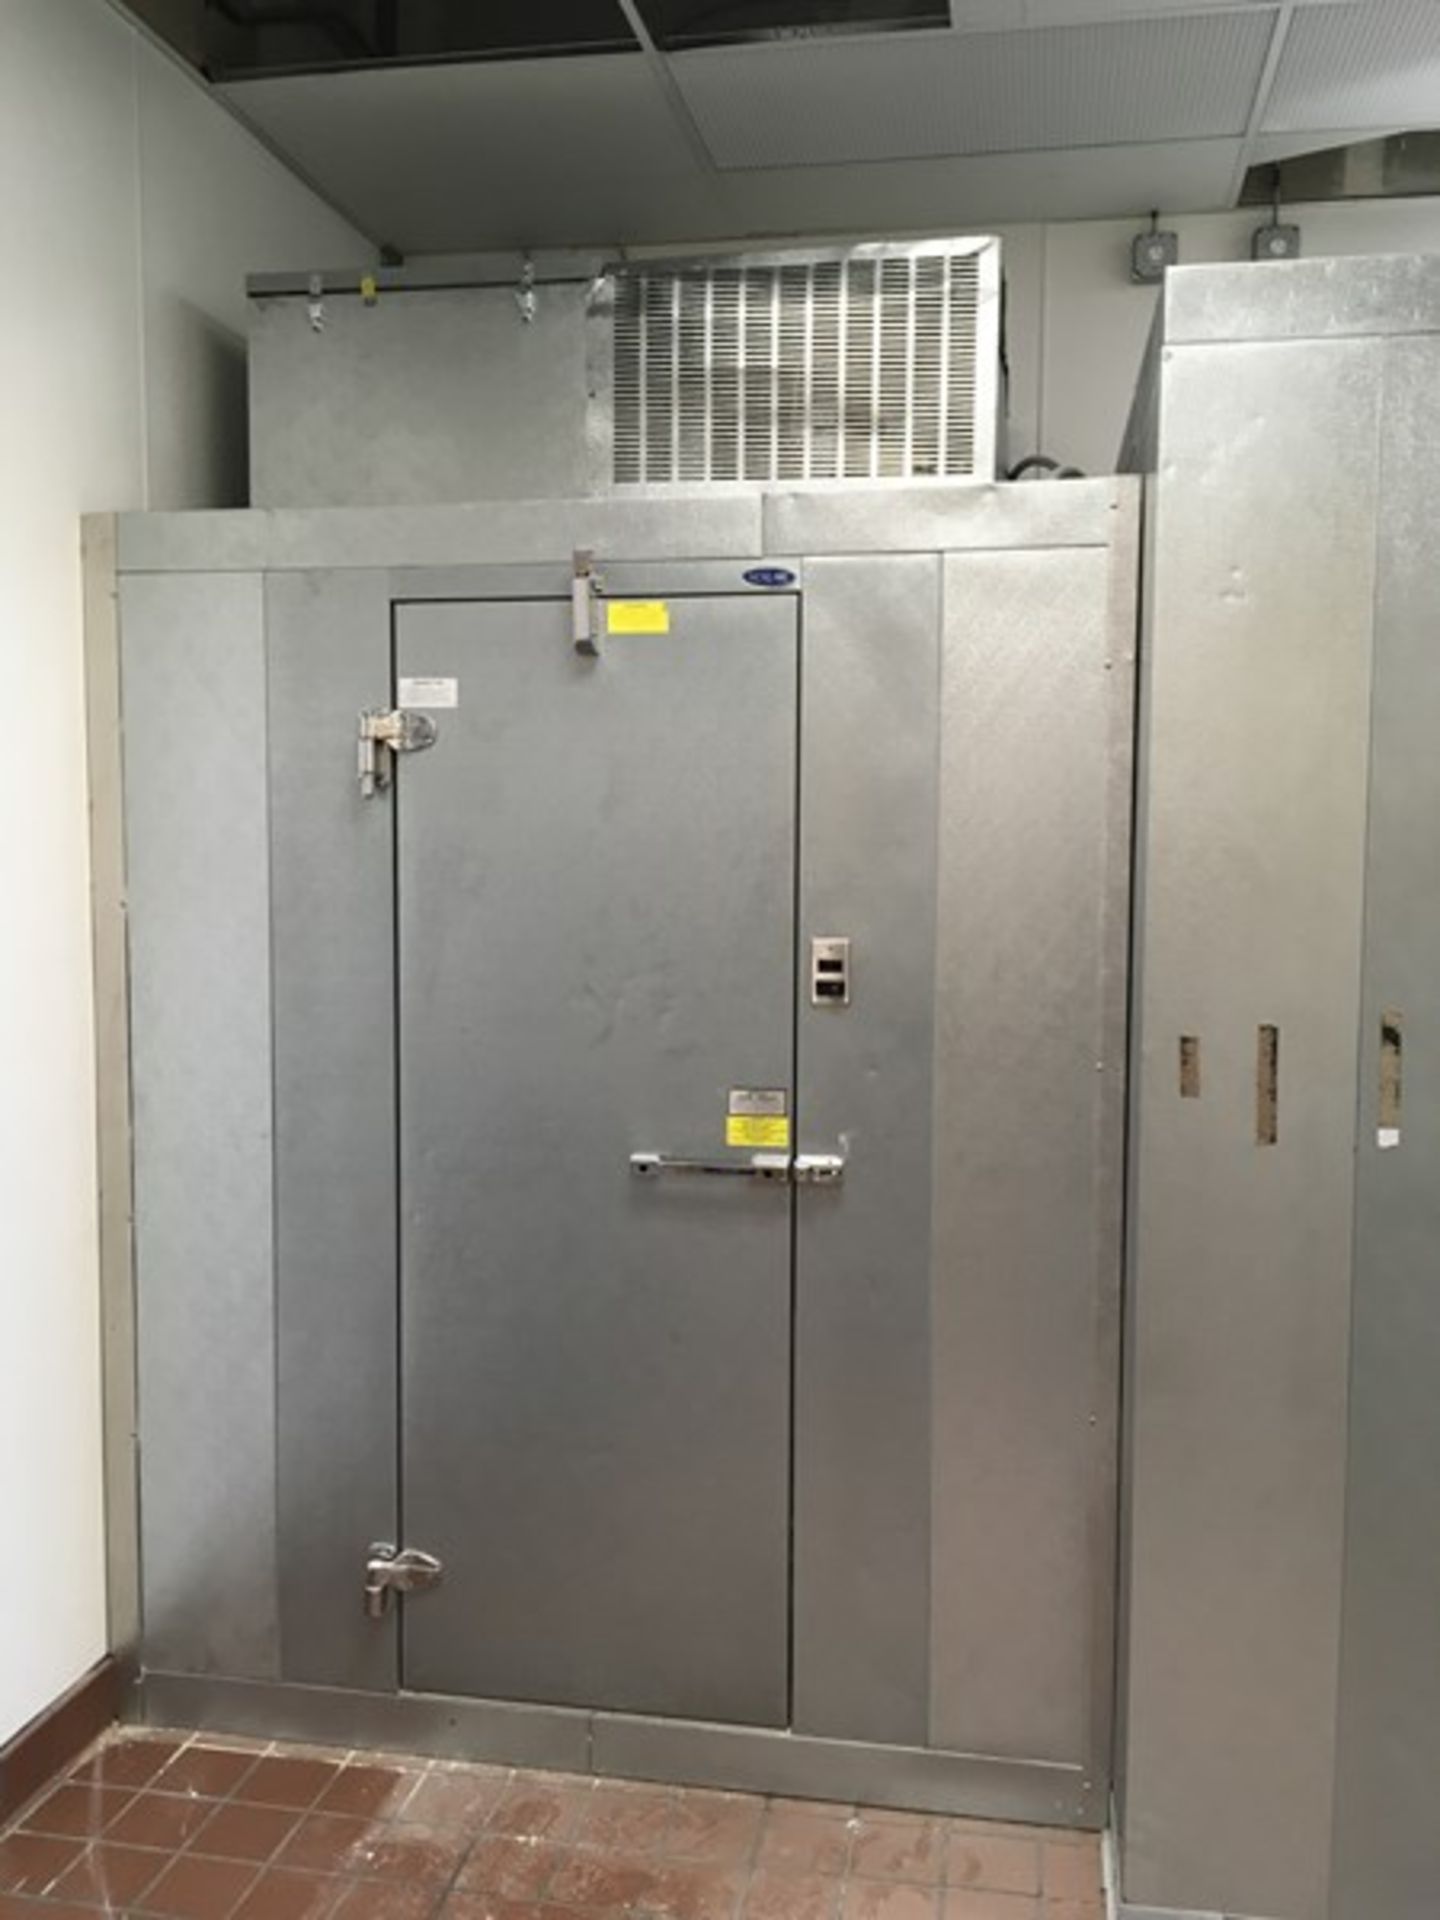 Walk-In Freezer by Norlake, 6' x 6' Walk-In Freezer by Norlake, Job Number: KL7756-CL-L/117222, - Image 11 of 11